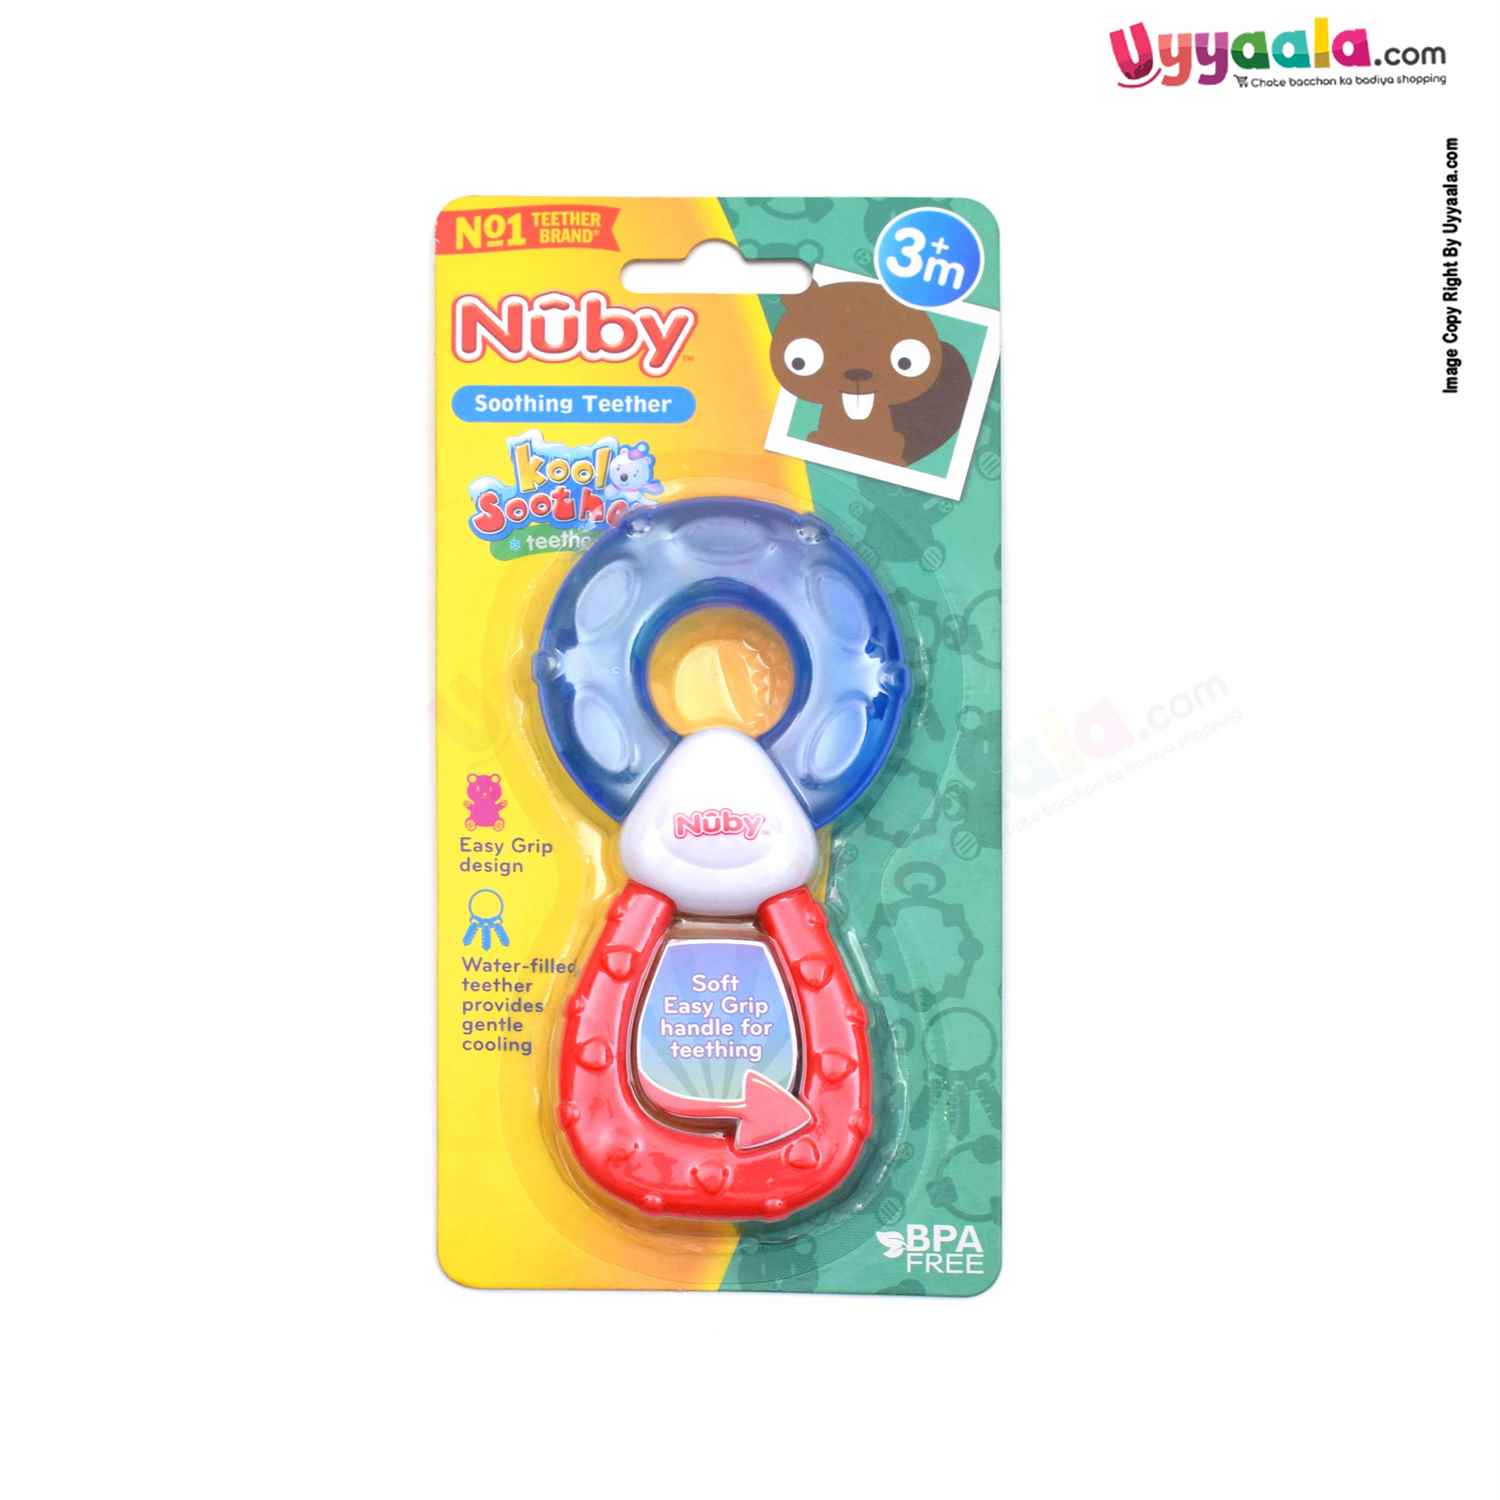 NUBY Water filled soothing teether with easy grip design - Blue & Red, 3+m